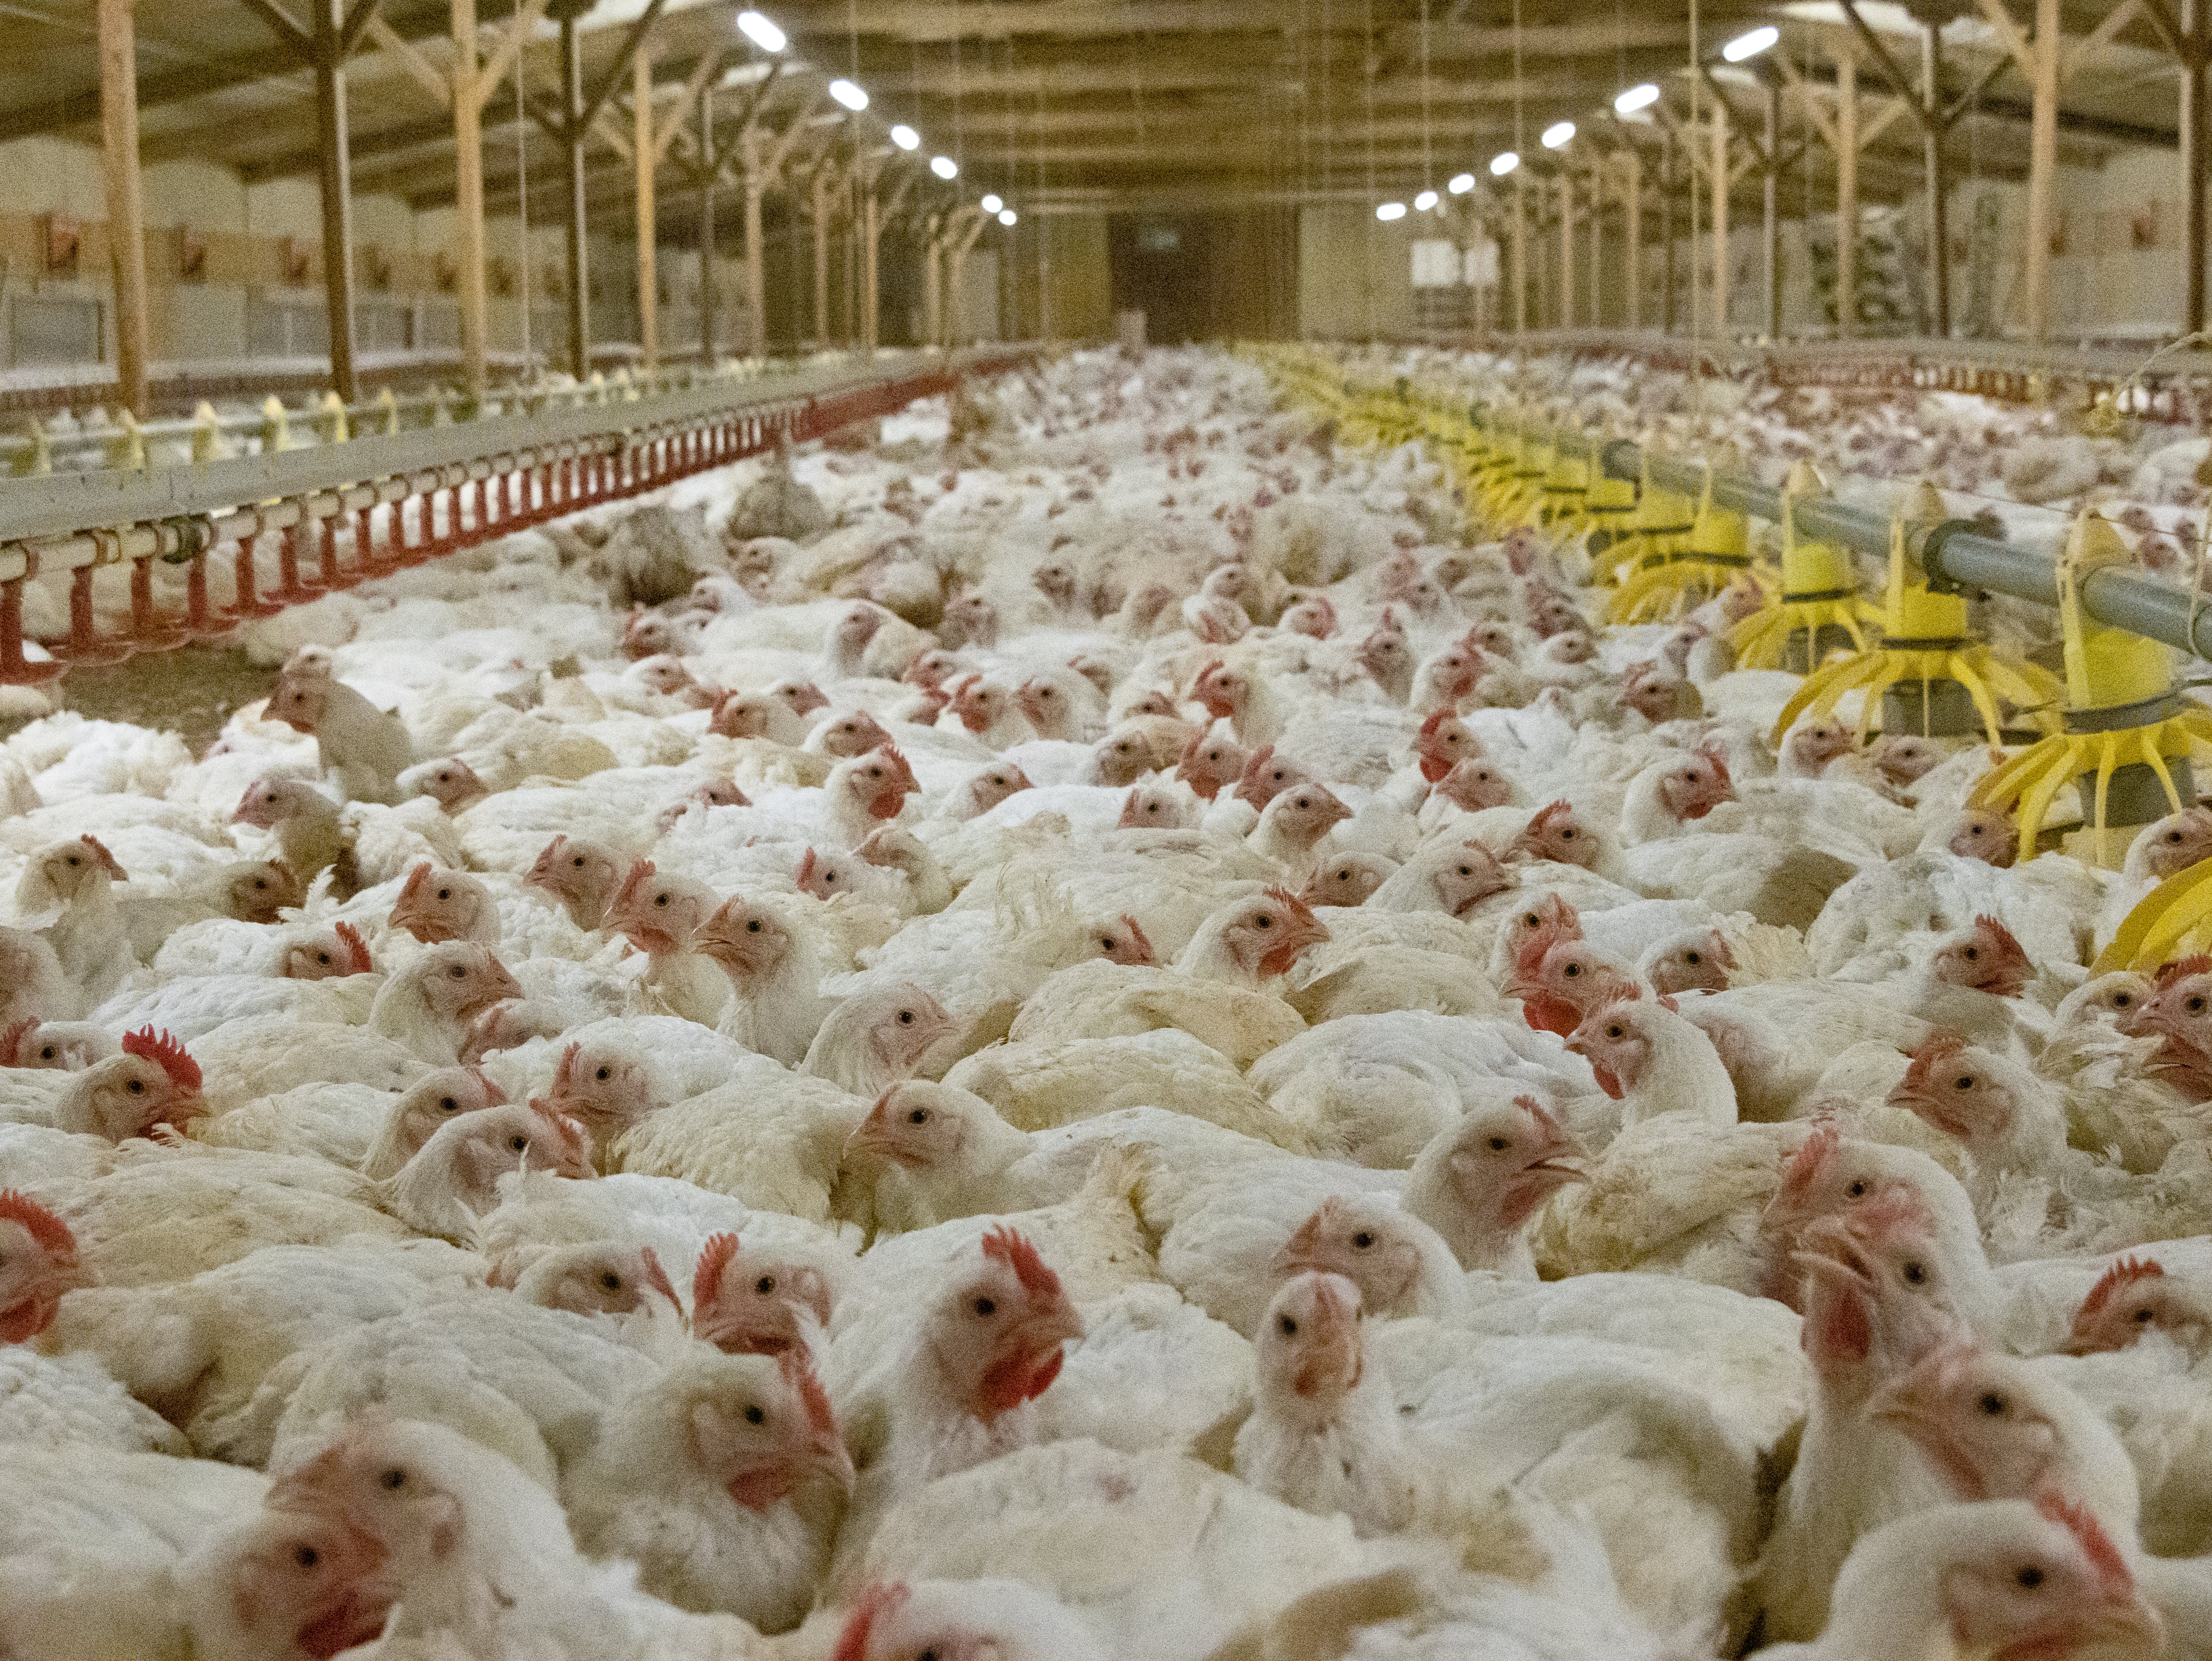 Birds densely packed together at factory farms are more vulnerable to dying of heat stress